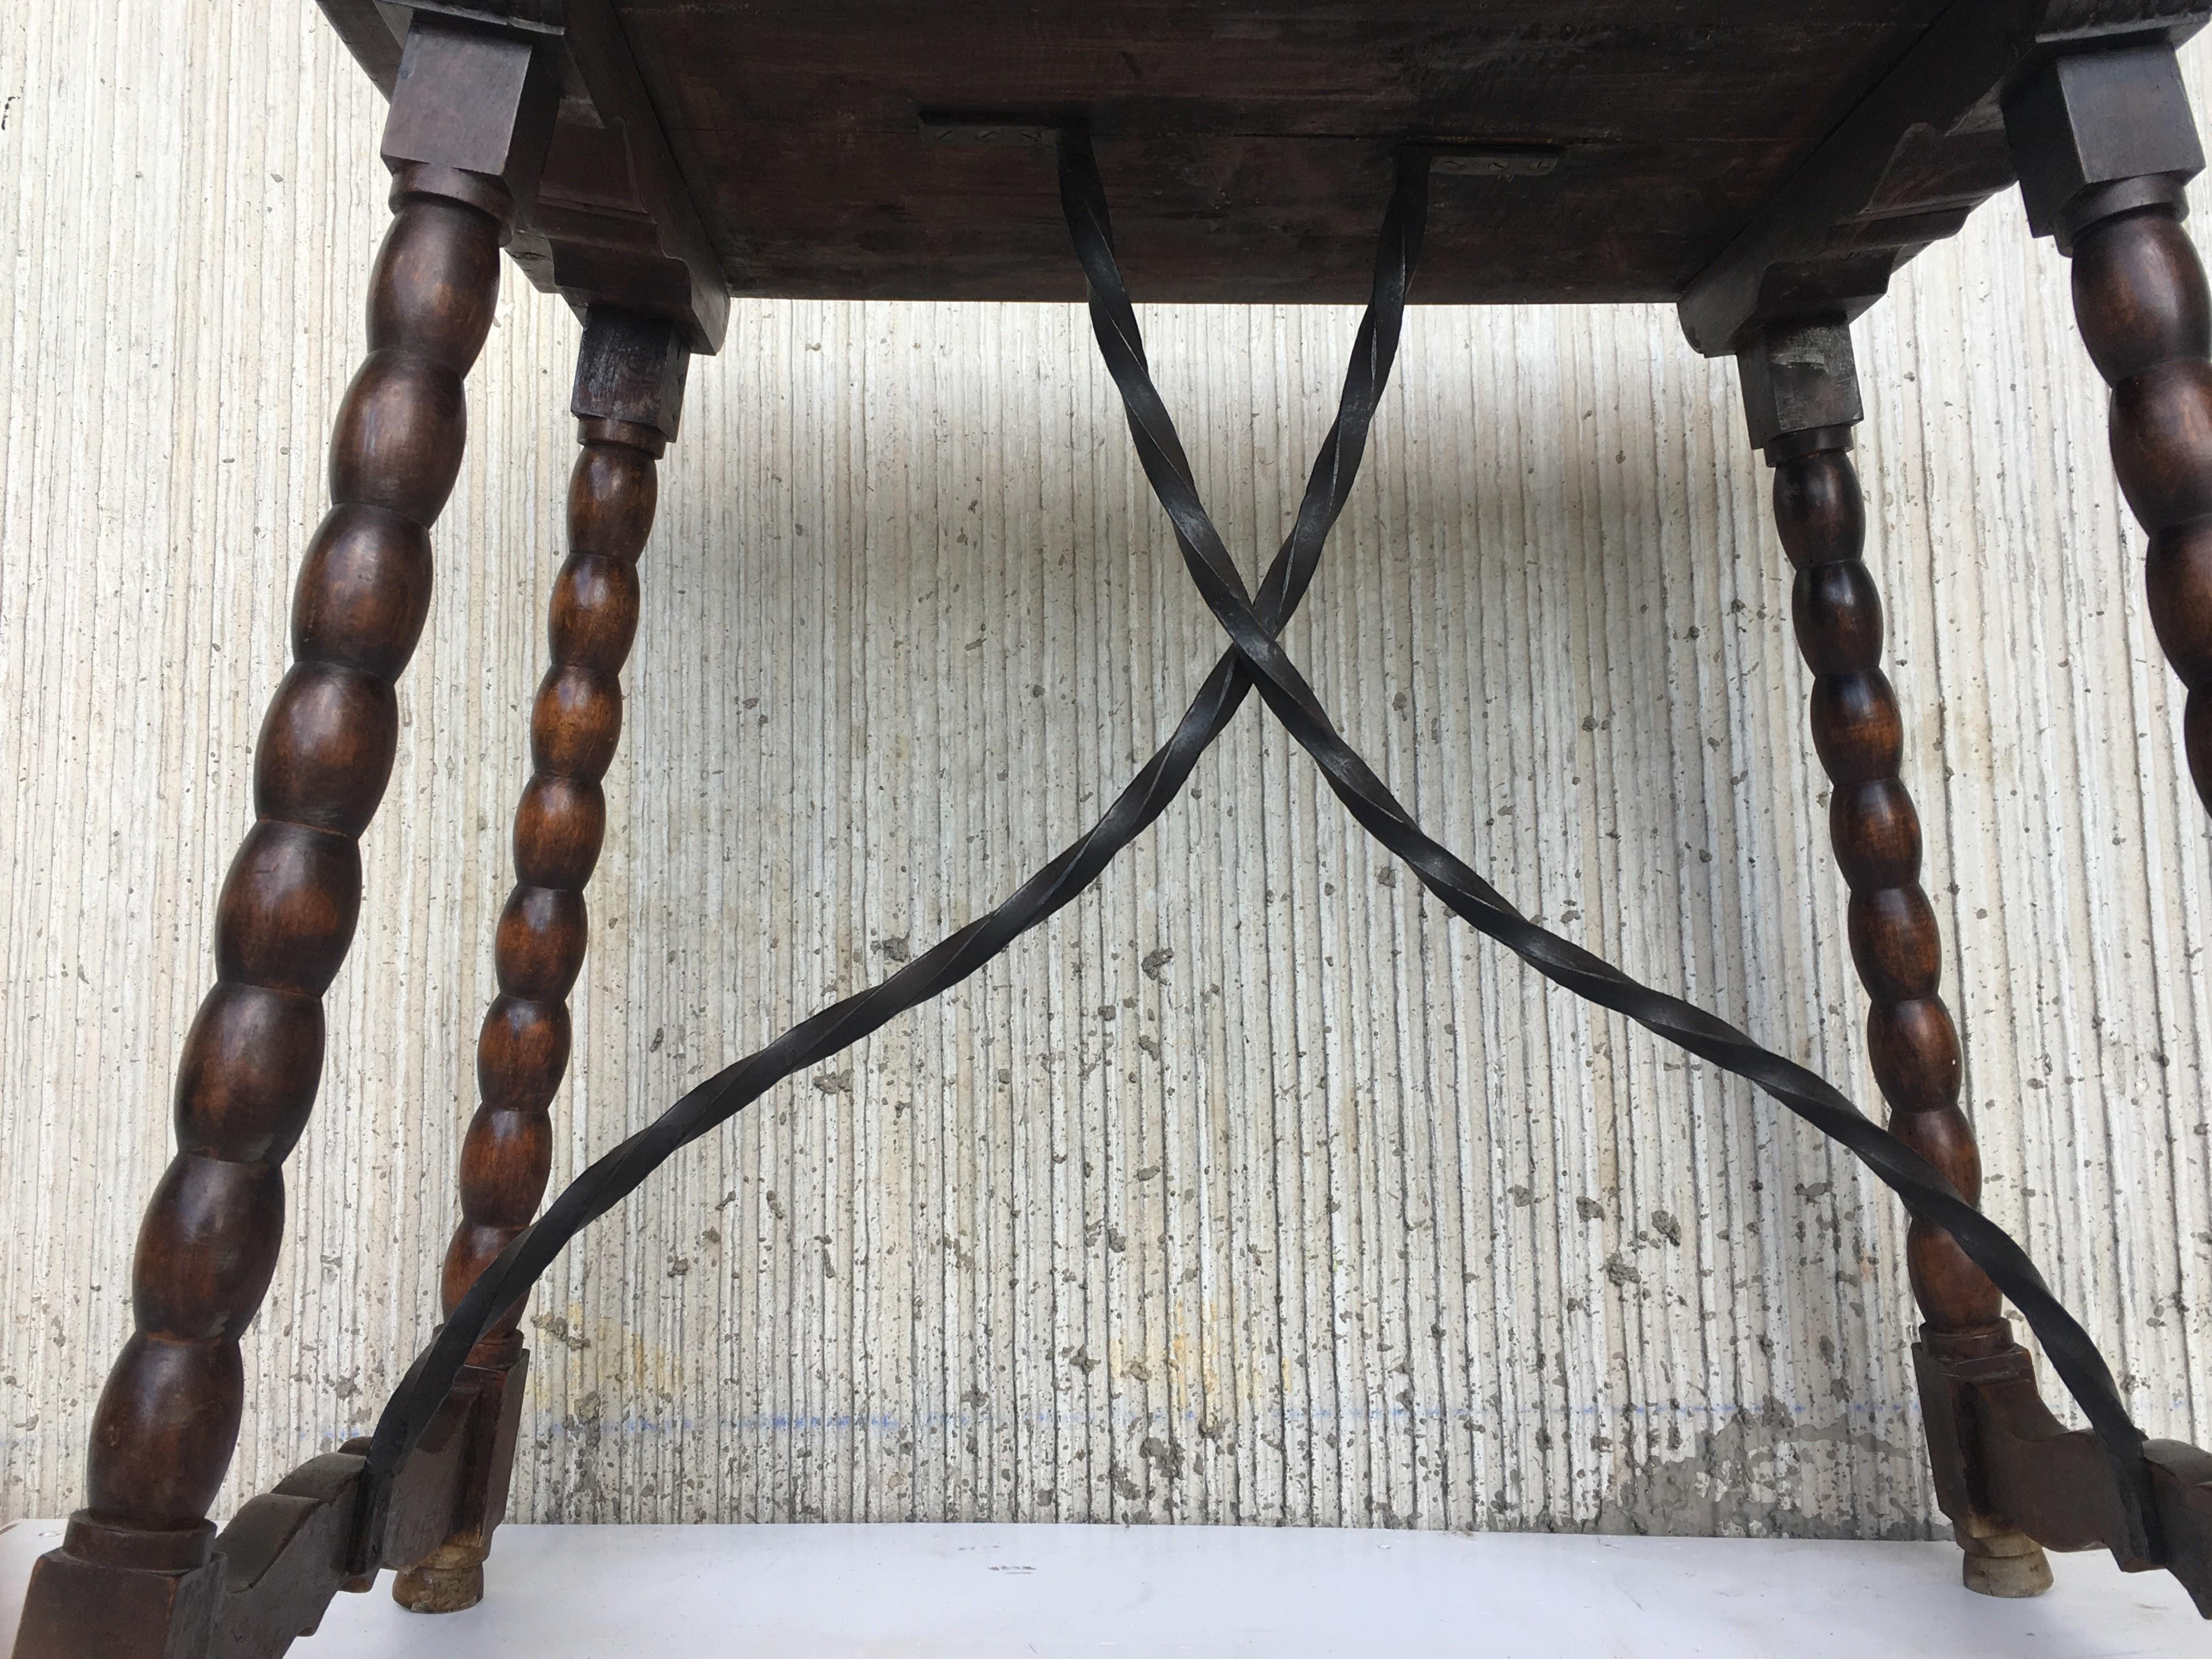 Spanish Baroque Side Table with Iron Stretcher and Carved Top in Walnut (19. Jahrhundert)